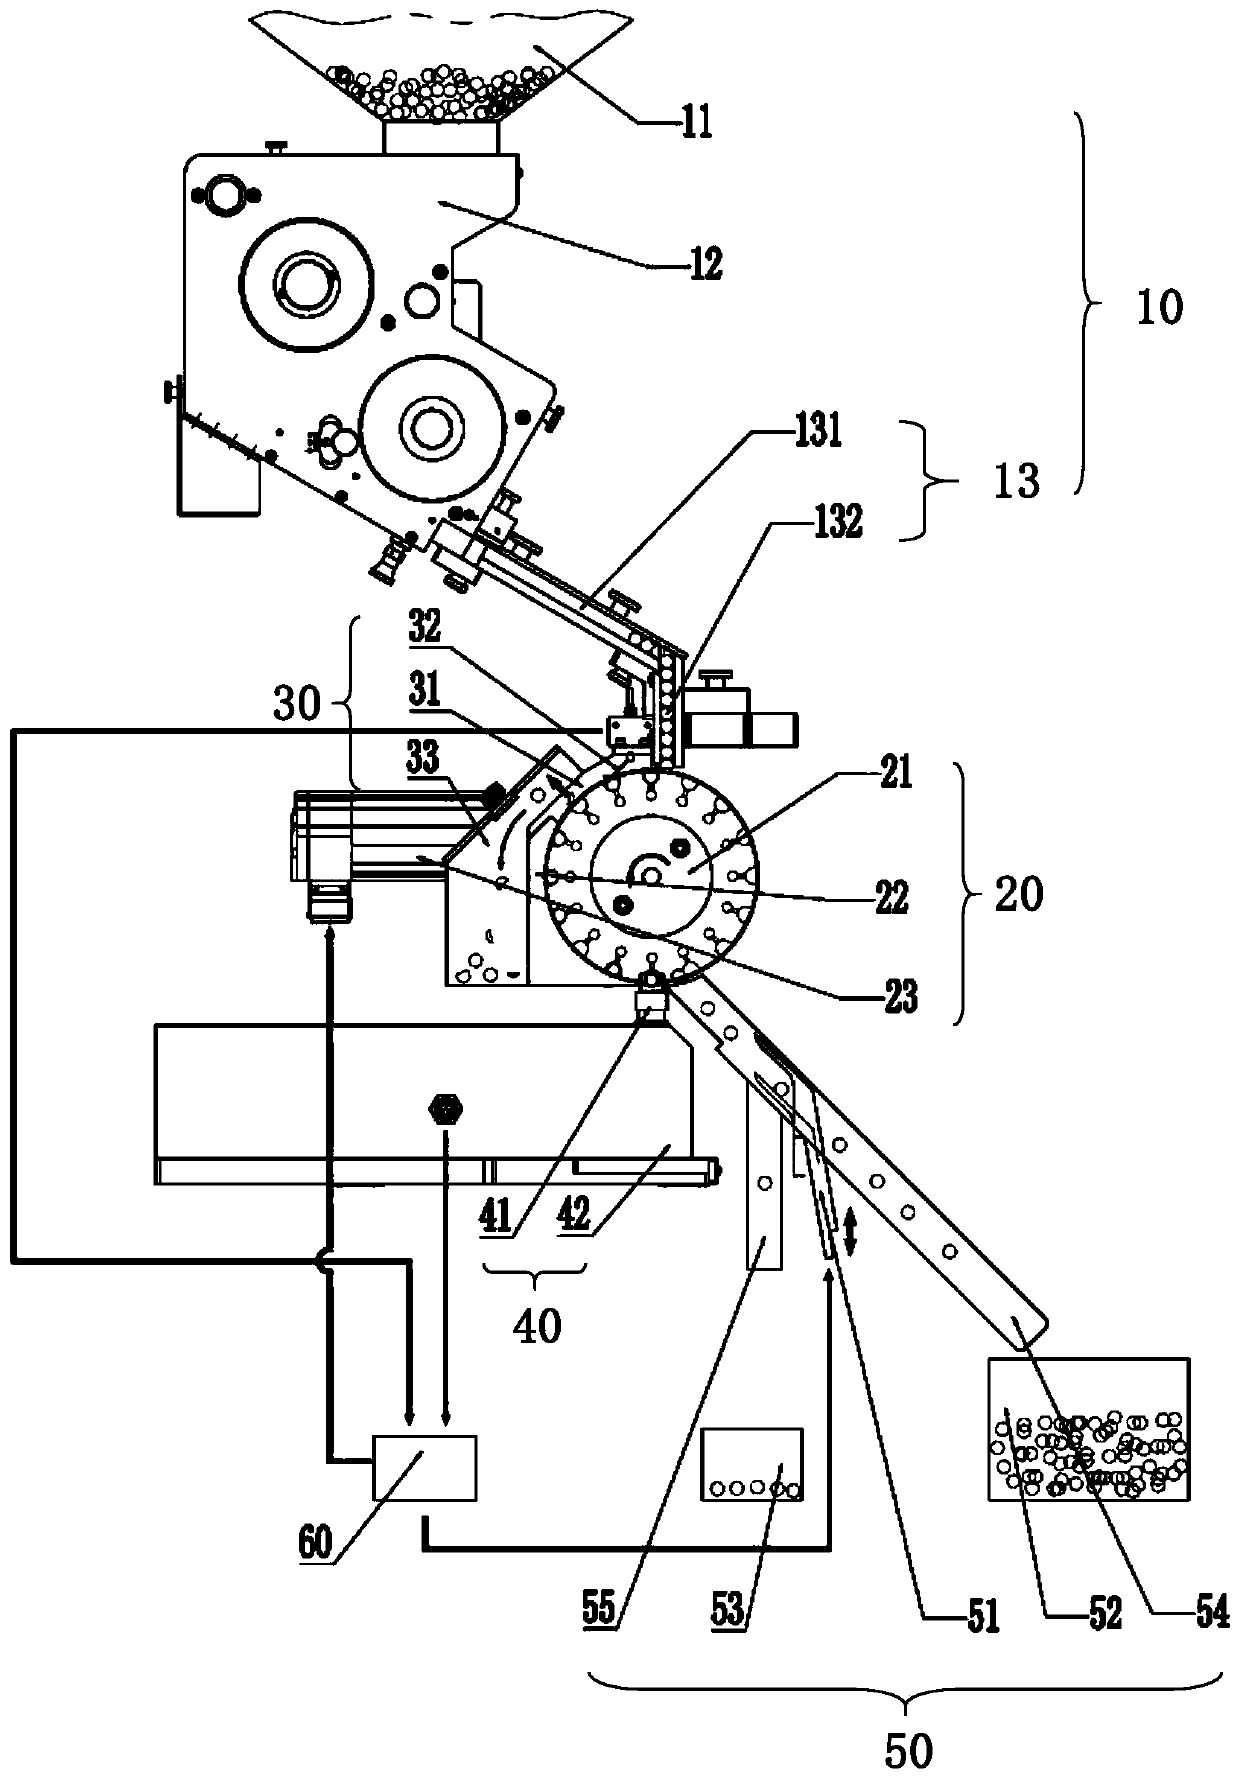 Small product weighing device